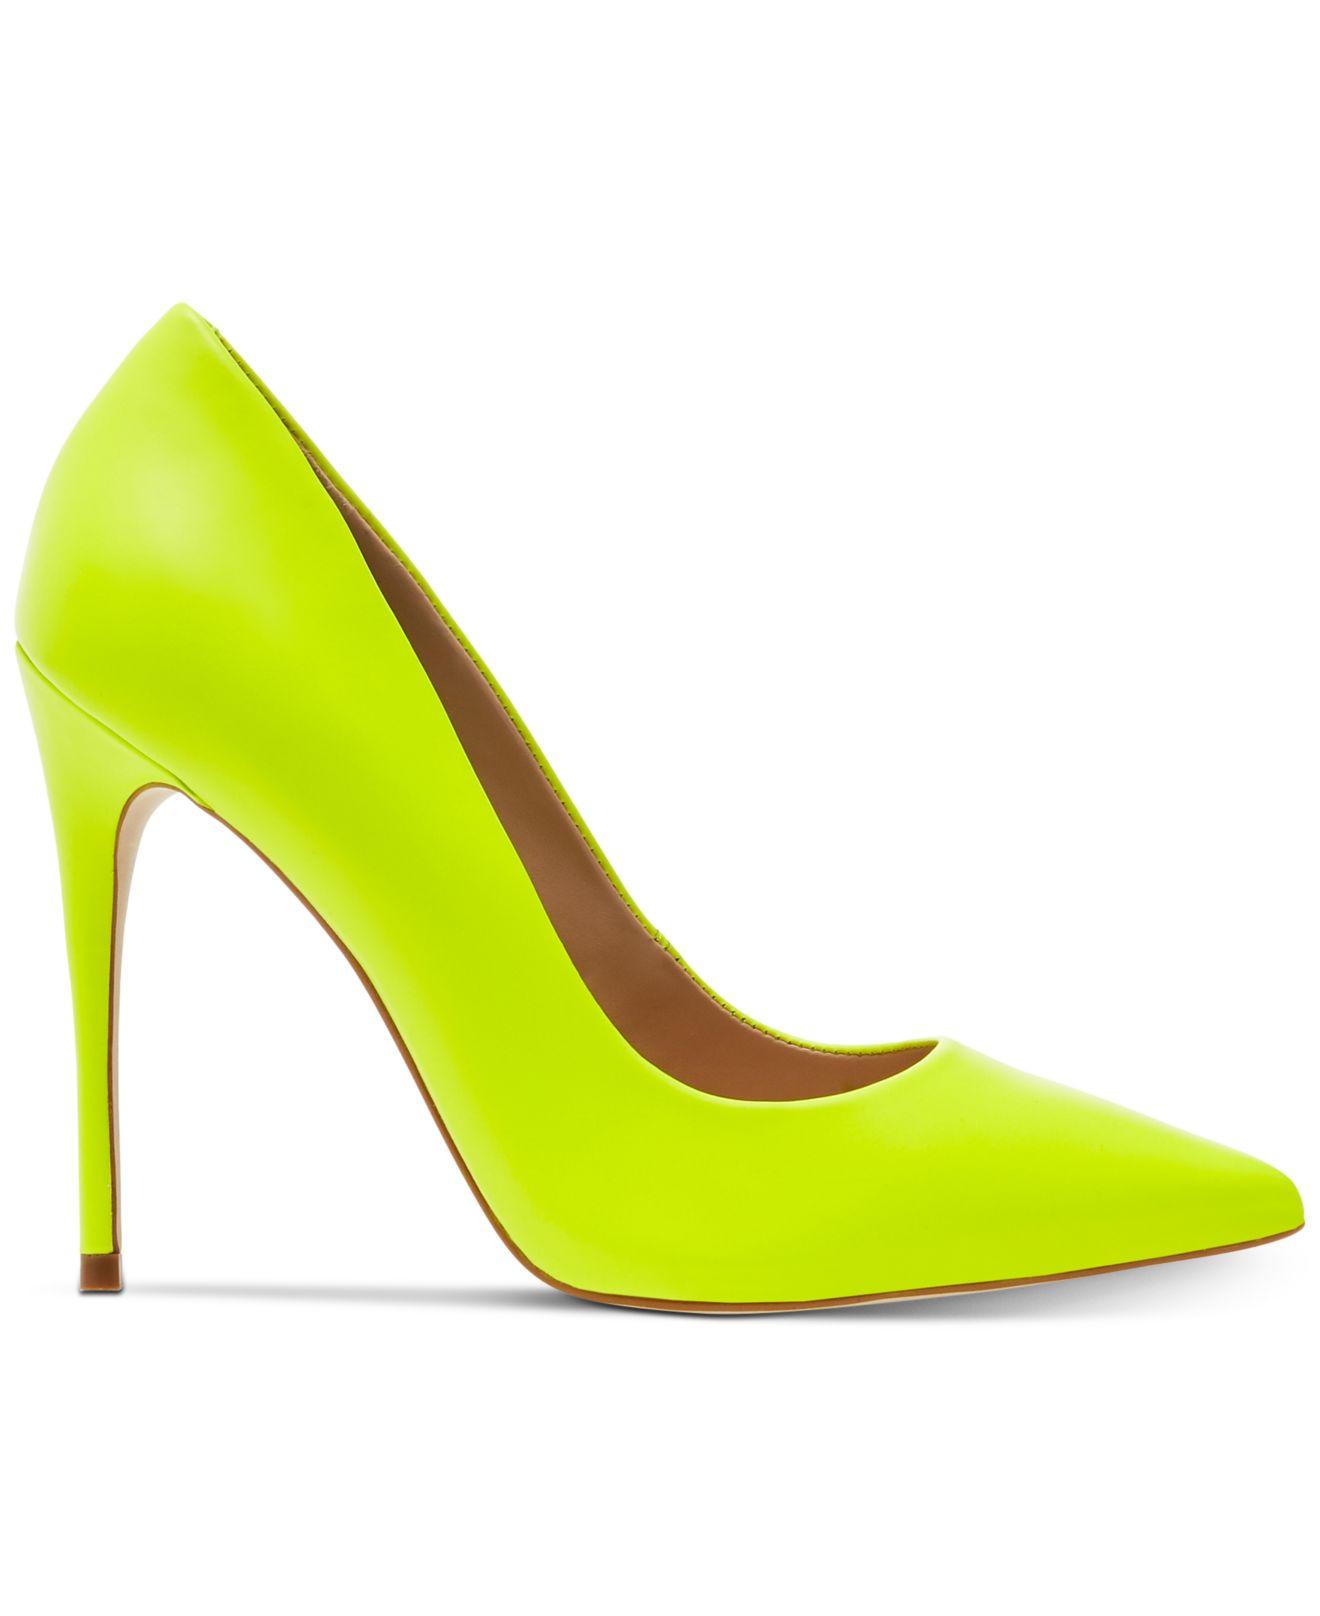 Steve Madden Daisie Neon Leather Pointed Toe Pump in Yellow | Lyst